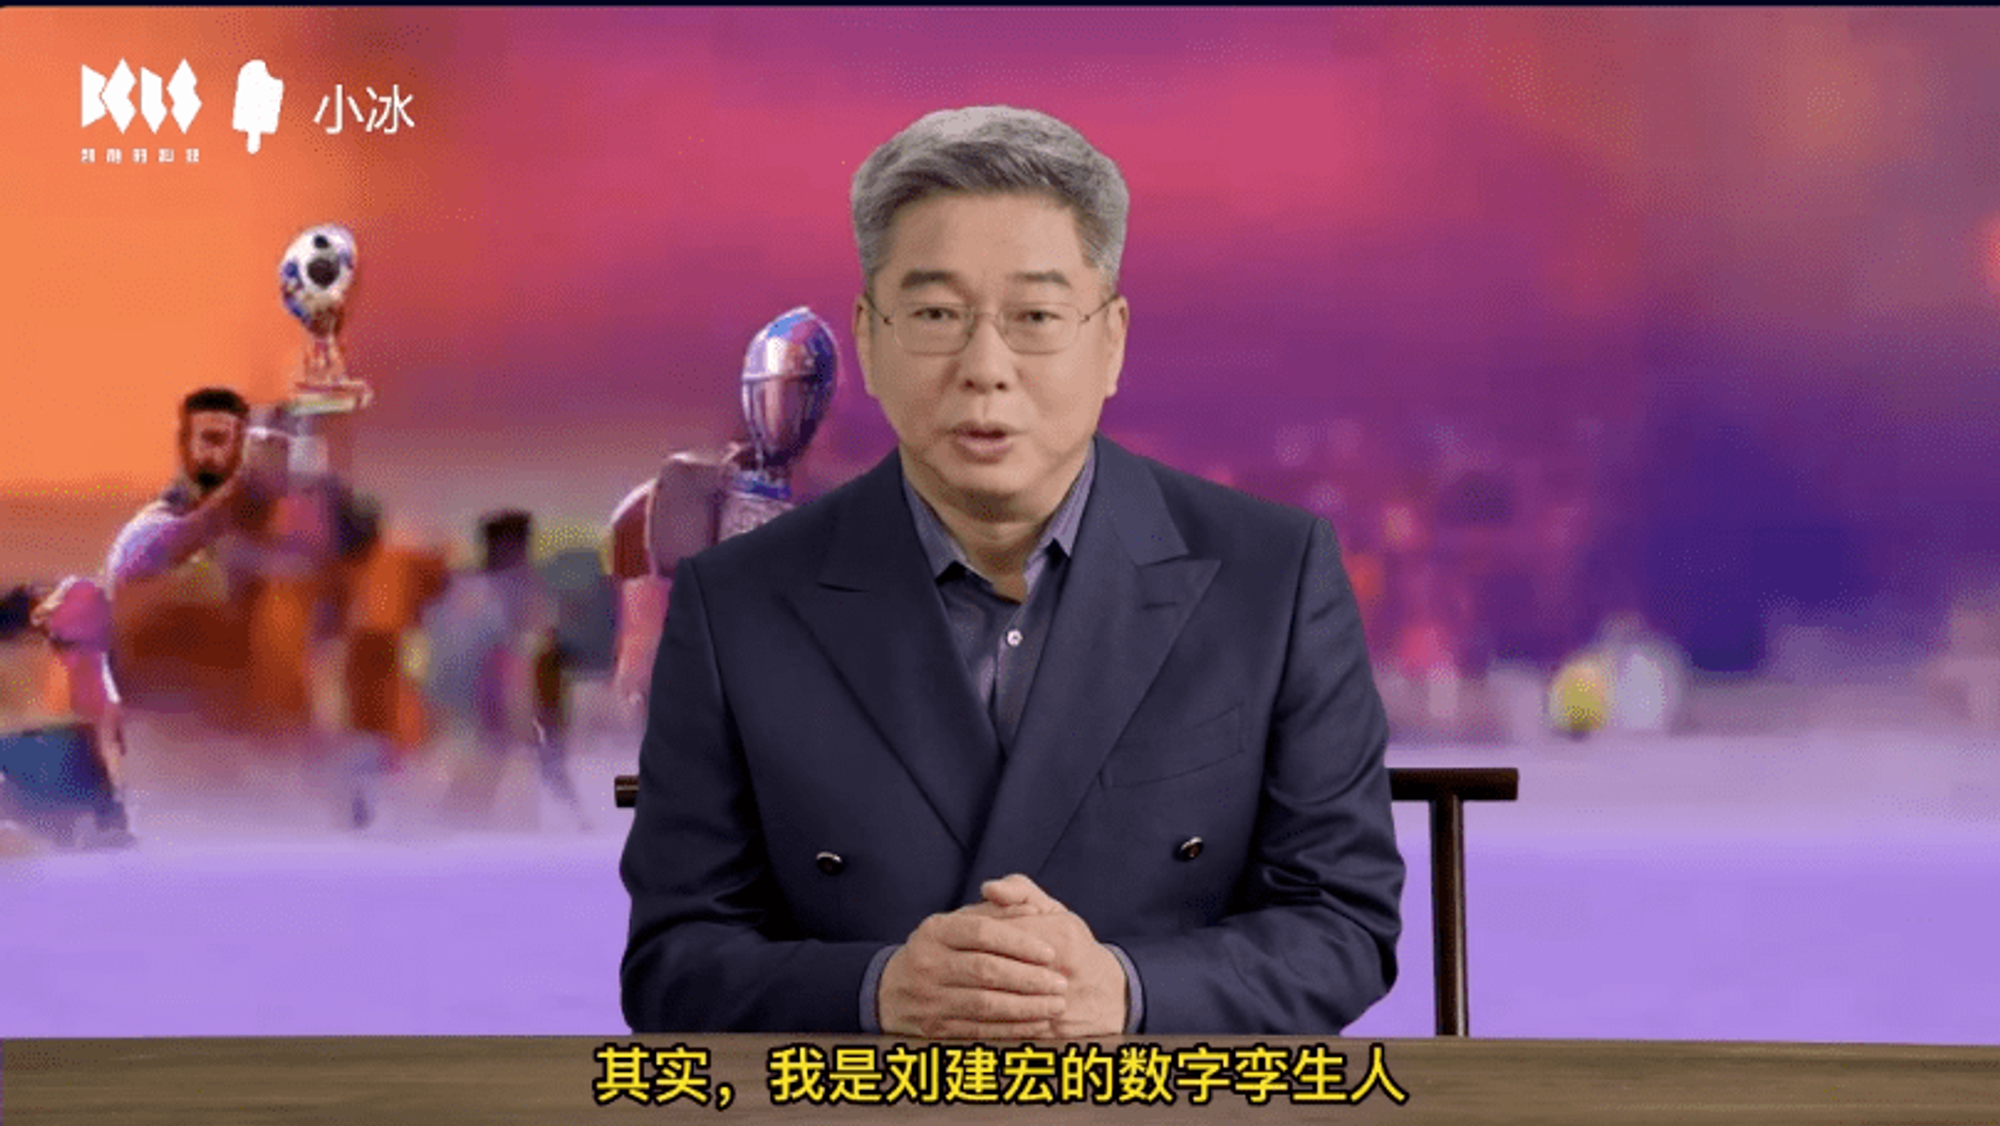 Deepfakes of Chinese influencers are livestreaming 24/7 | MIT Technology Review